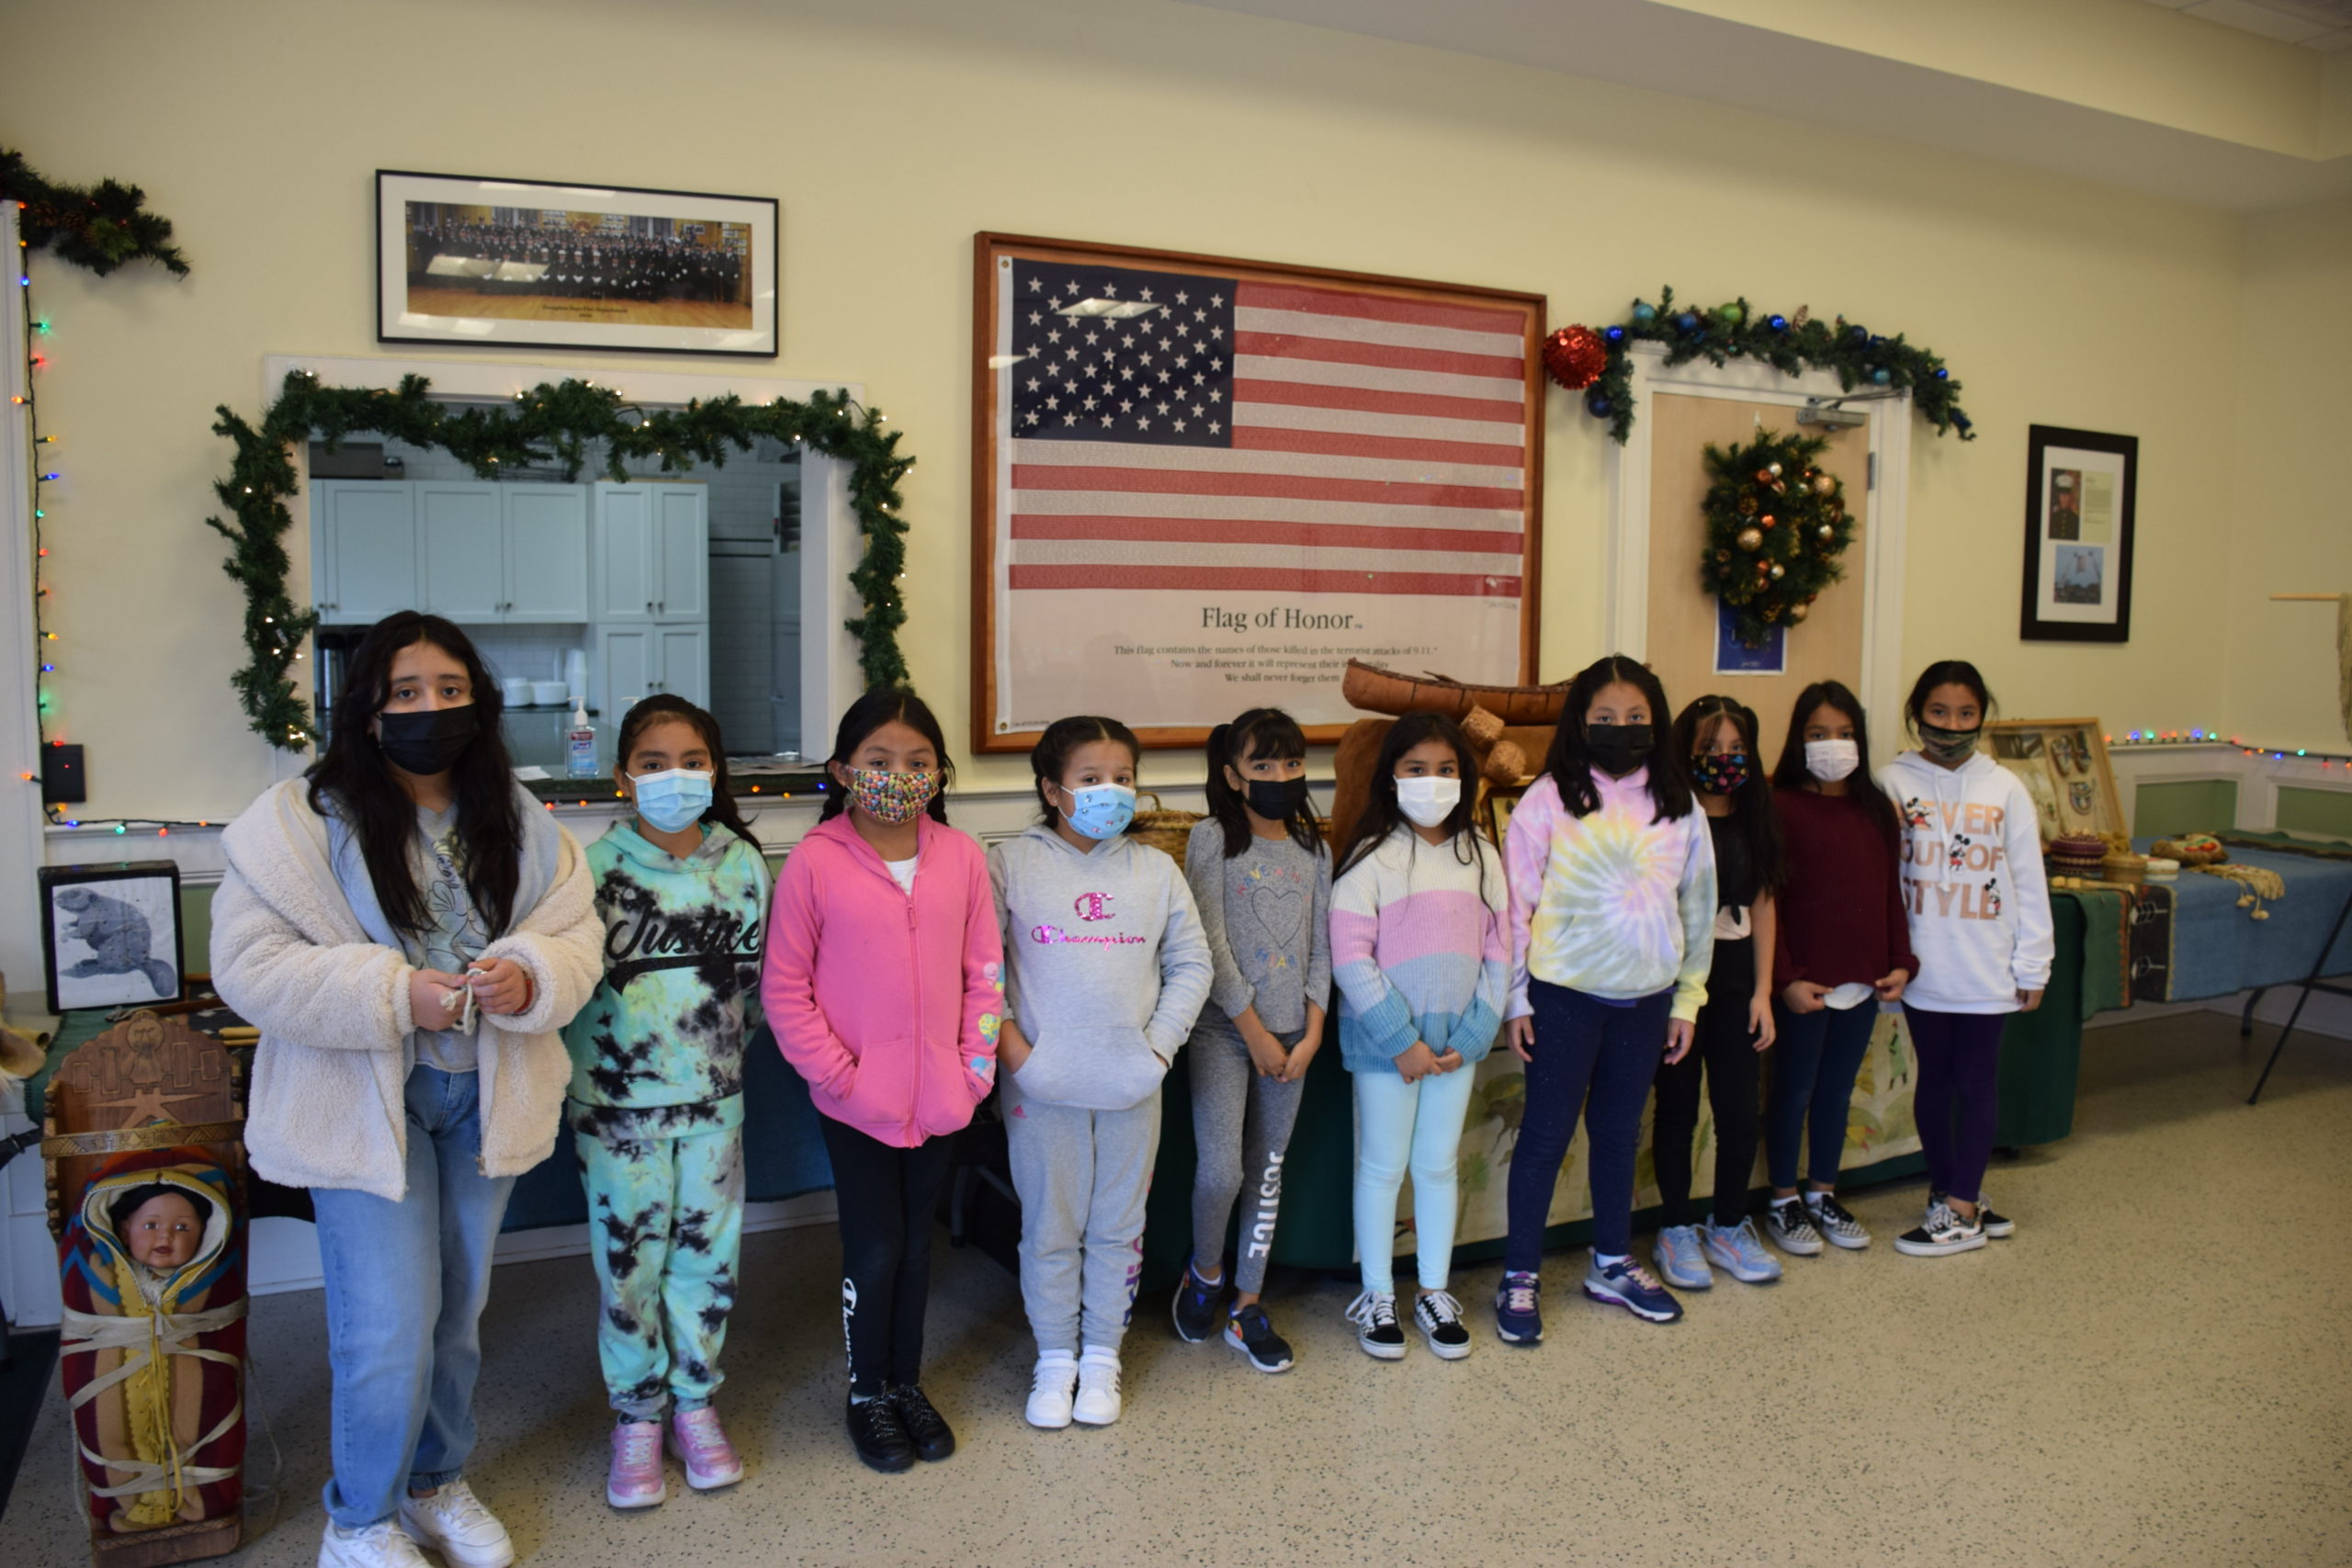 Hampton Bays Elementary School fourth graders learned more about the lives and history of Native Americans during a presentation by Journeys into American Indian Territory on December 16 at the Hampton Bays Fire firehouse. Through the interactive workshop, students explored a Native American museum featuring artifacts such as clothing, dolls, pottery and a longhouse replica. They also listened to traditional Native American stories, played Native American games and
constructed clay pots.